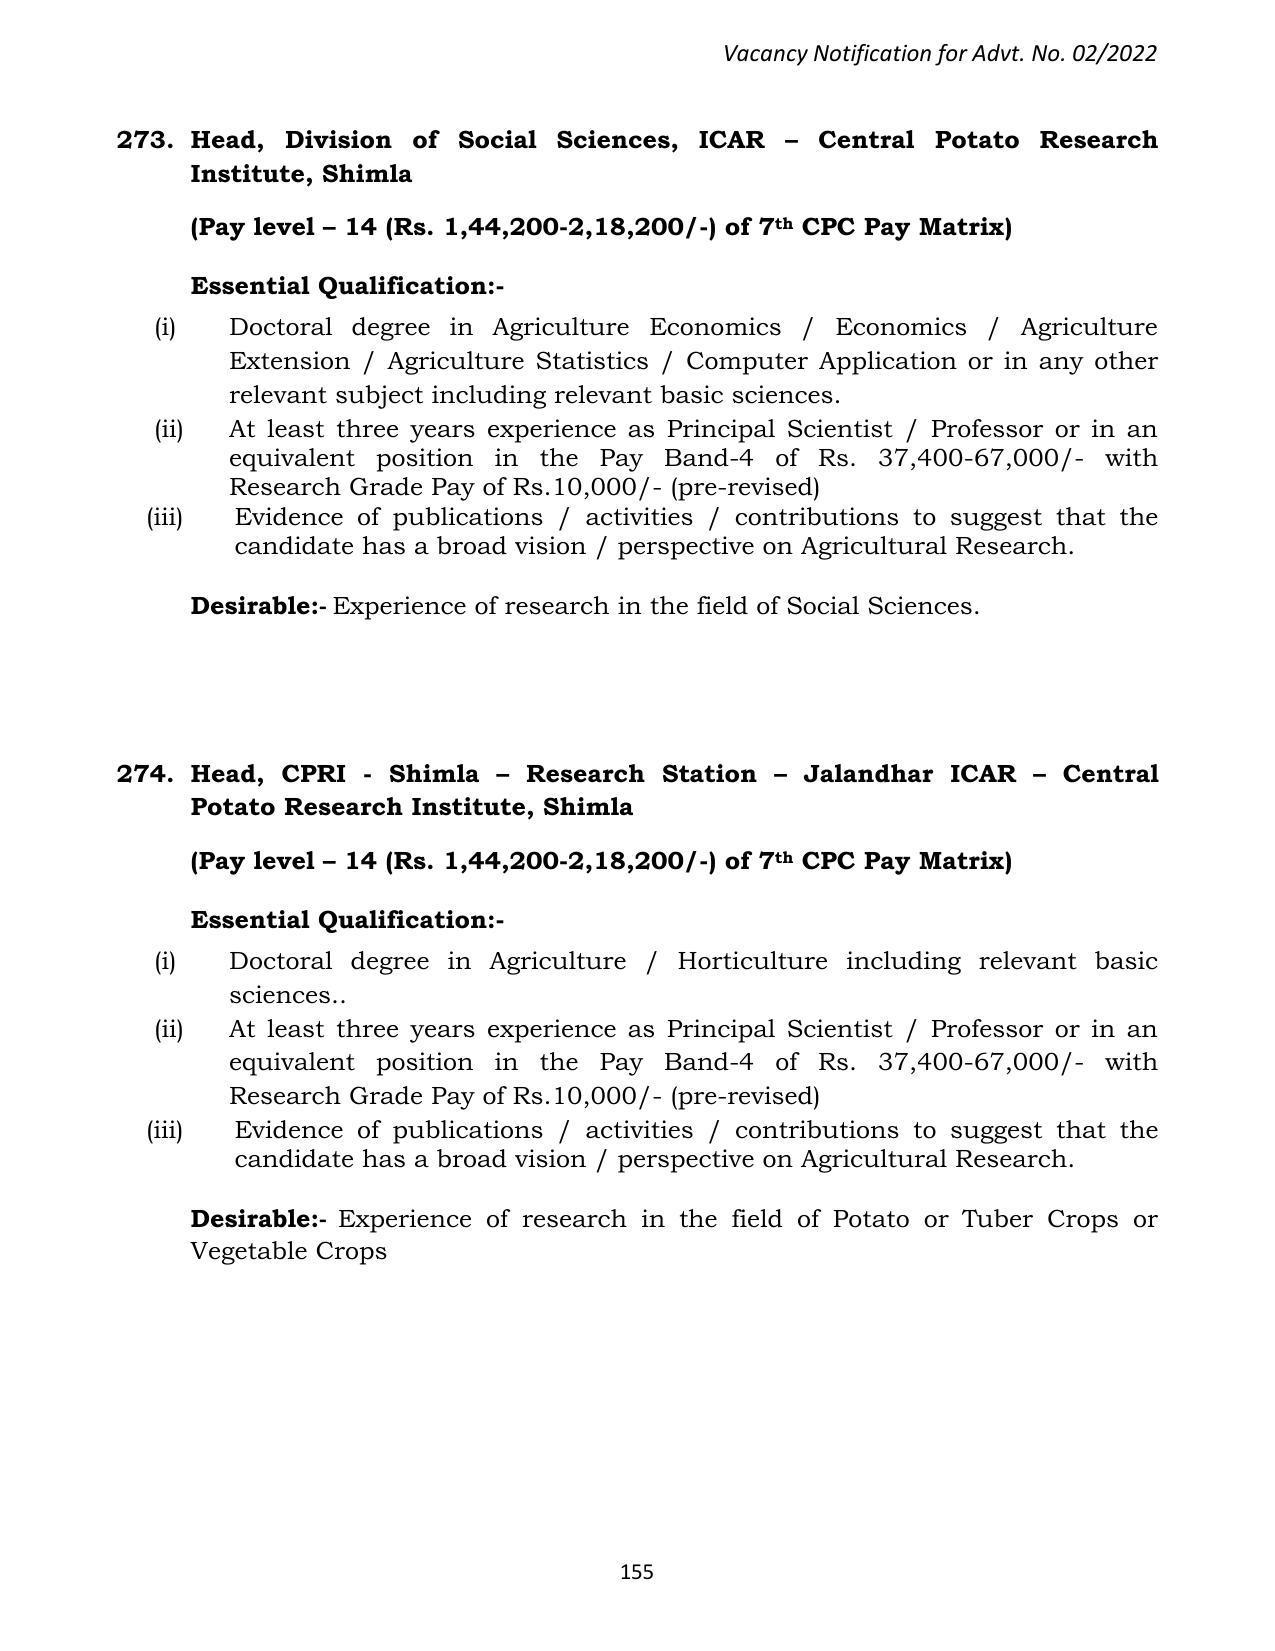 ASRB Non-Research Management Recruitment 2022 - Page 189